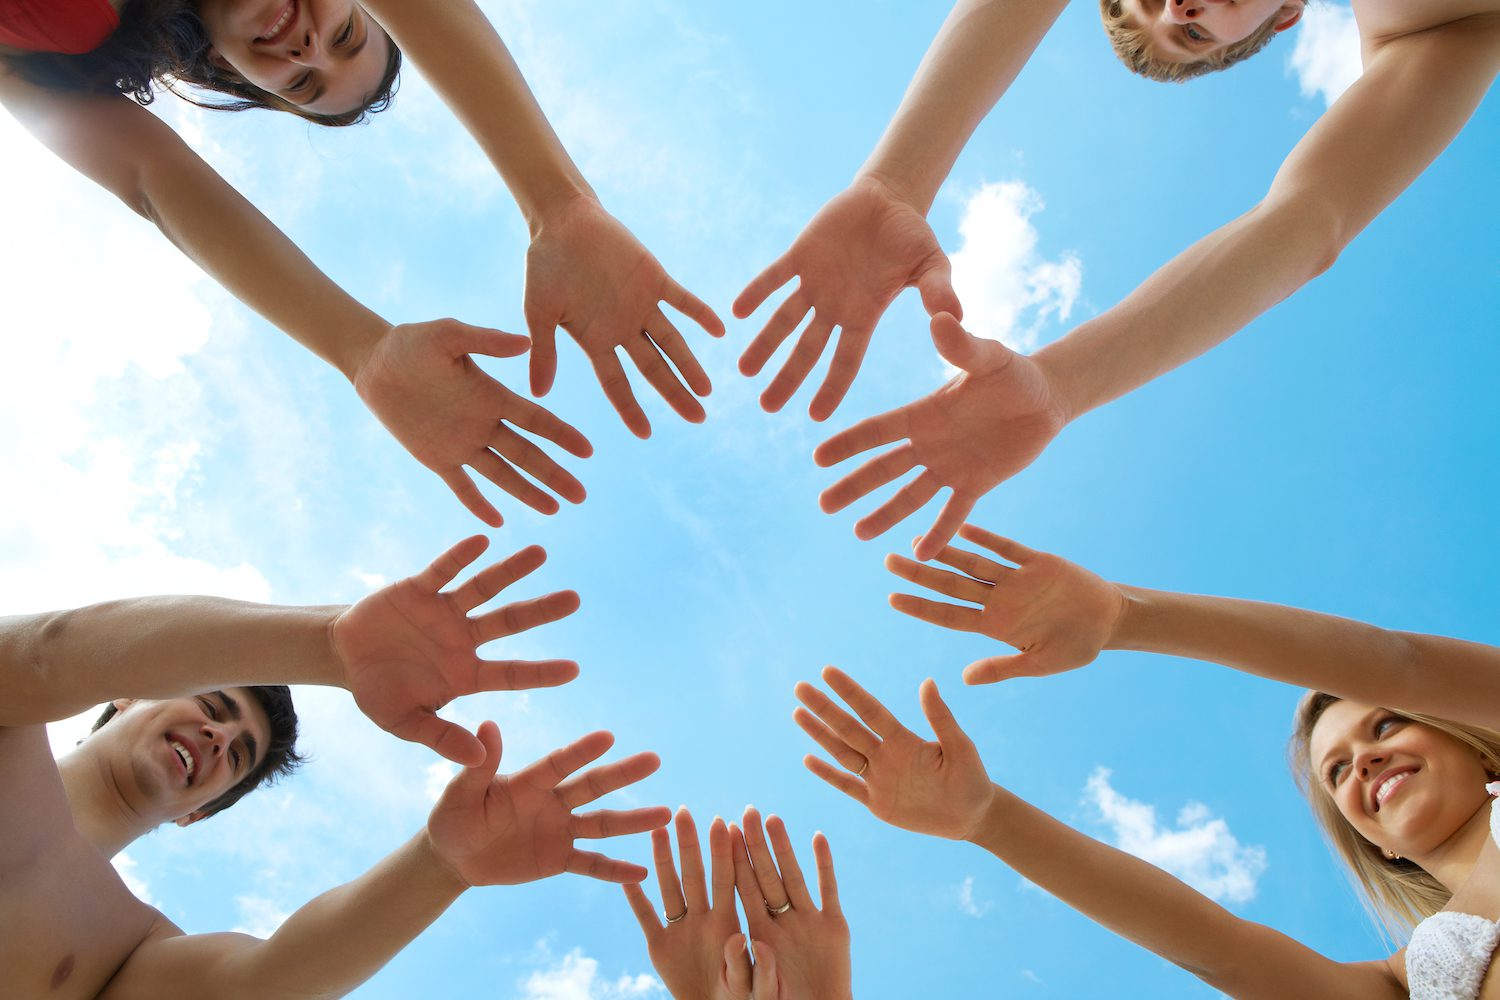 Circle of people's hands on a blue sky background